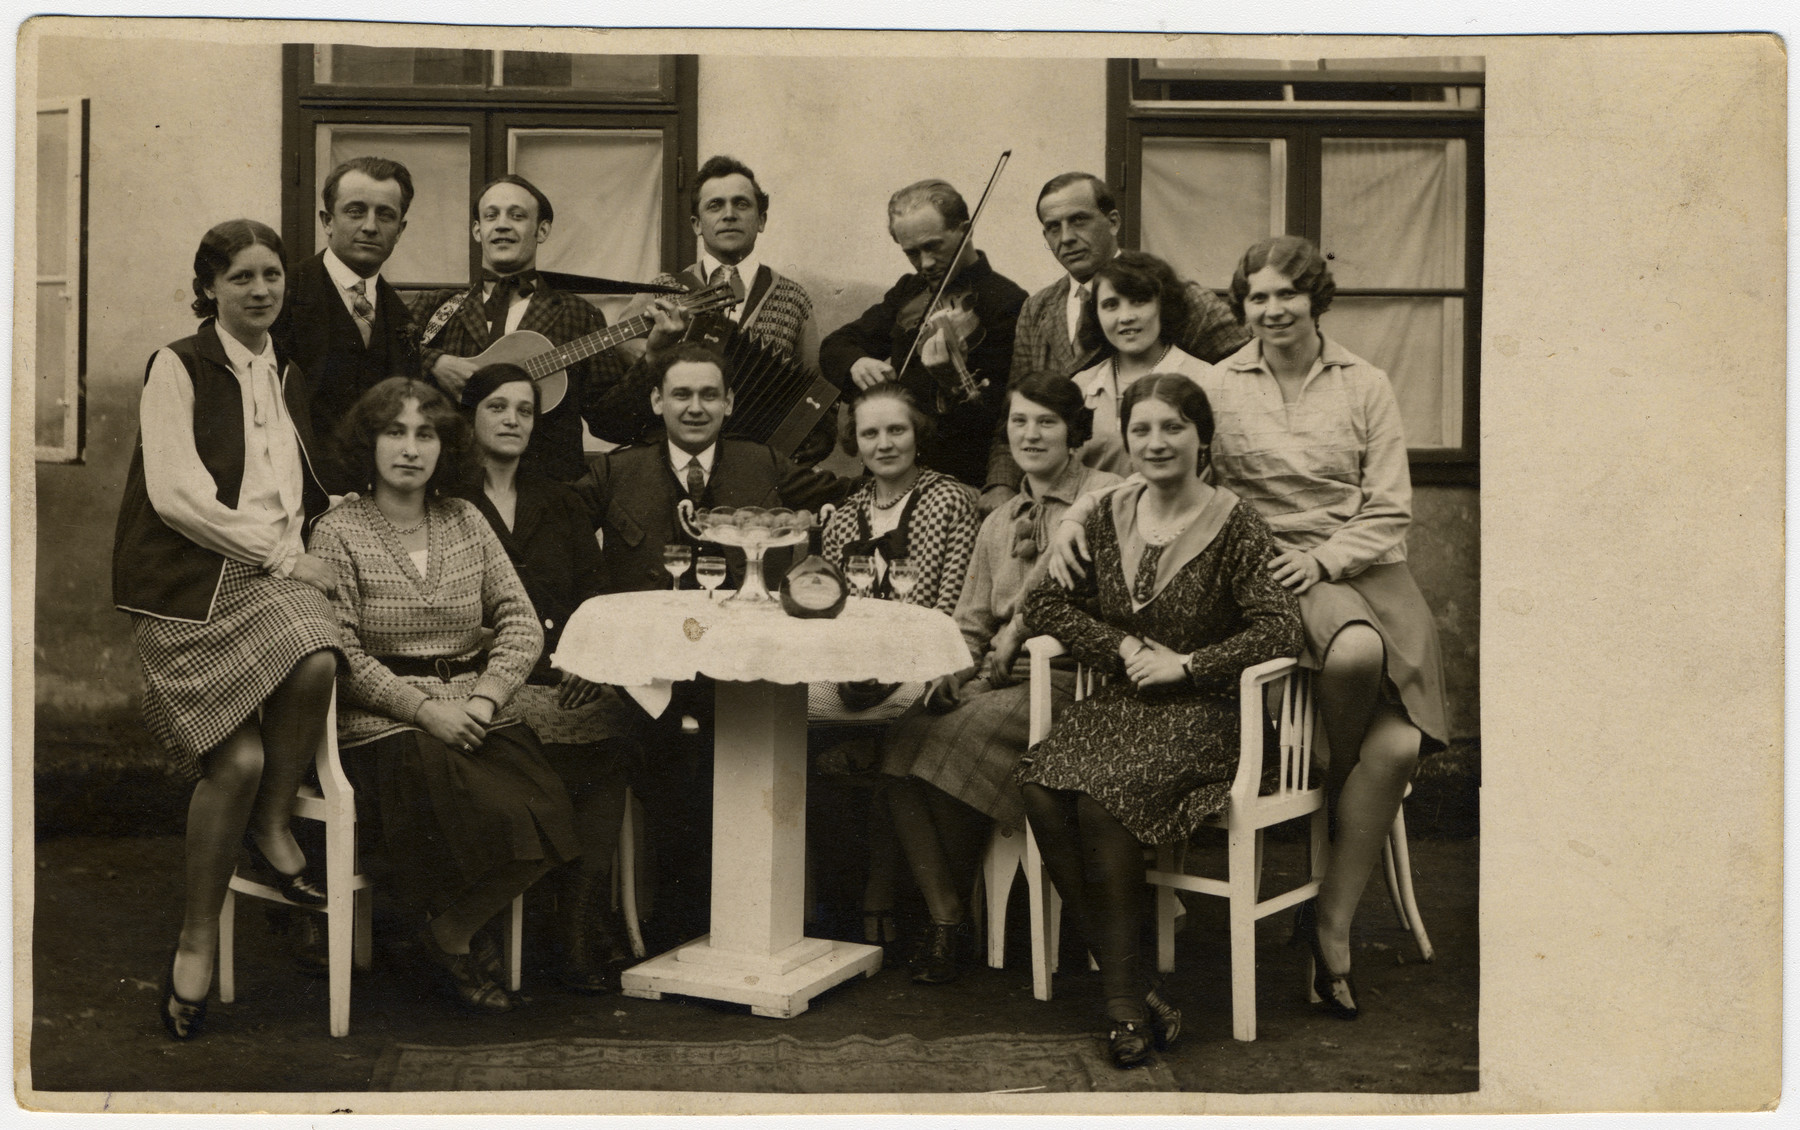 A group of friends gathers around a table, with musicians in back.

Among those pictured is Martha Holzmann (seated at  lower left).